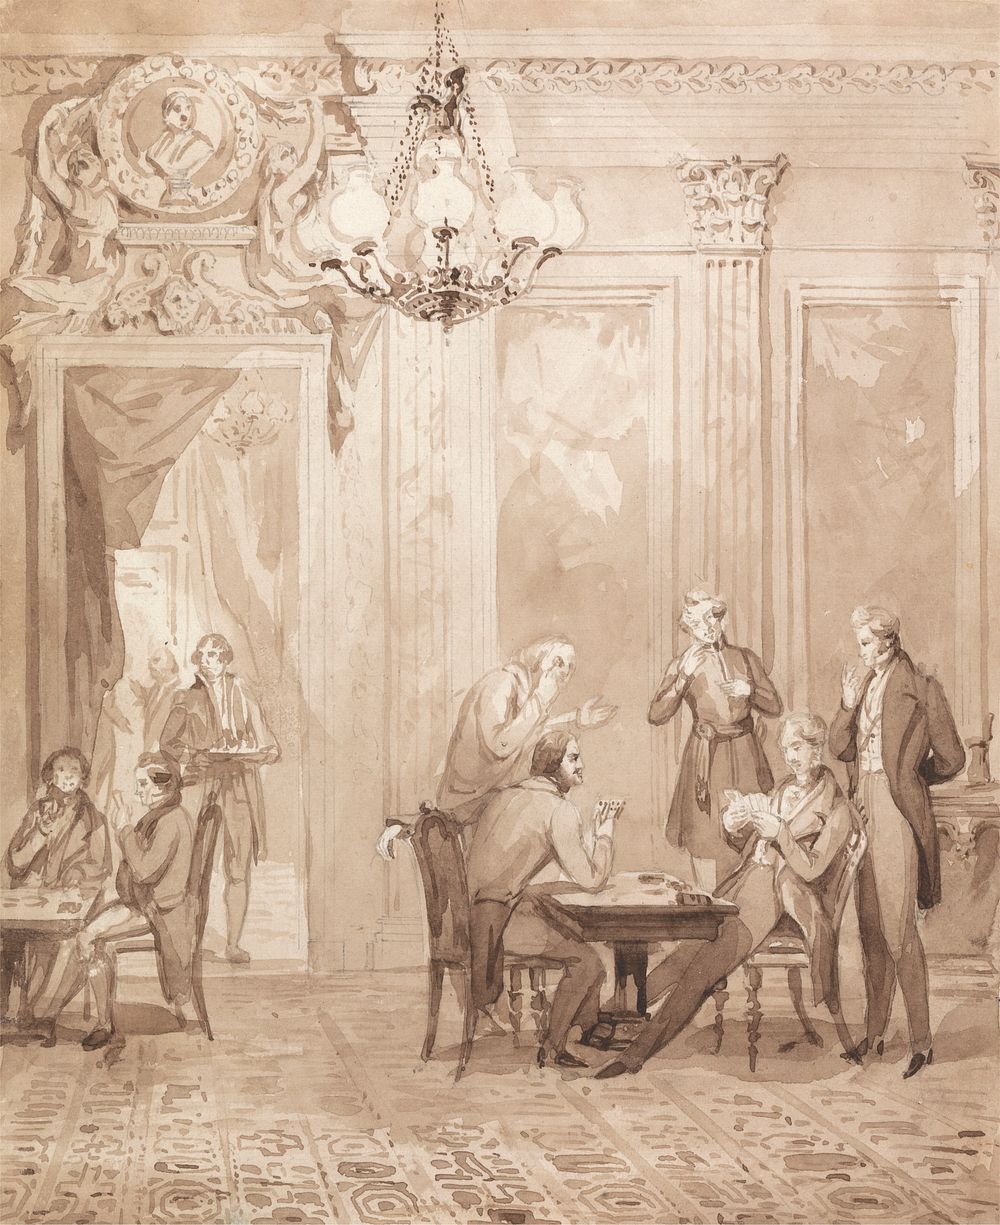 The Life of a Nobleman: Scene the Fifth - The Gambling House by Henry Dawe